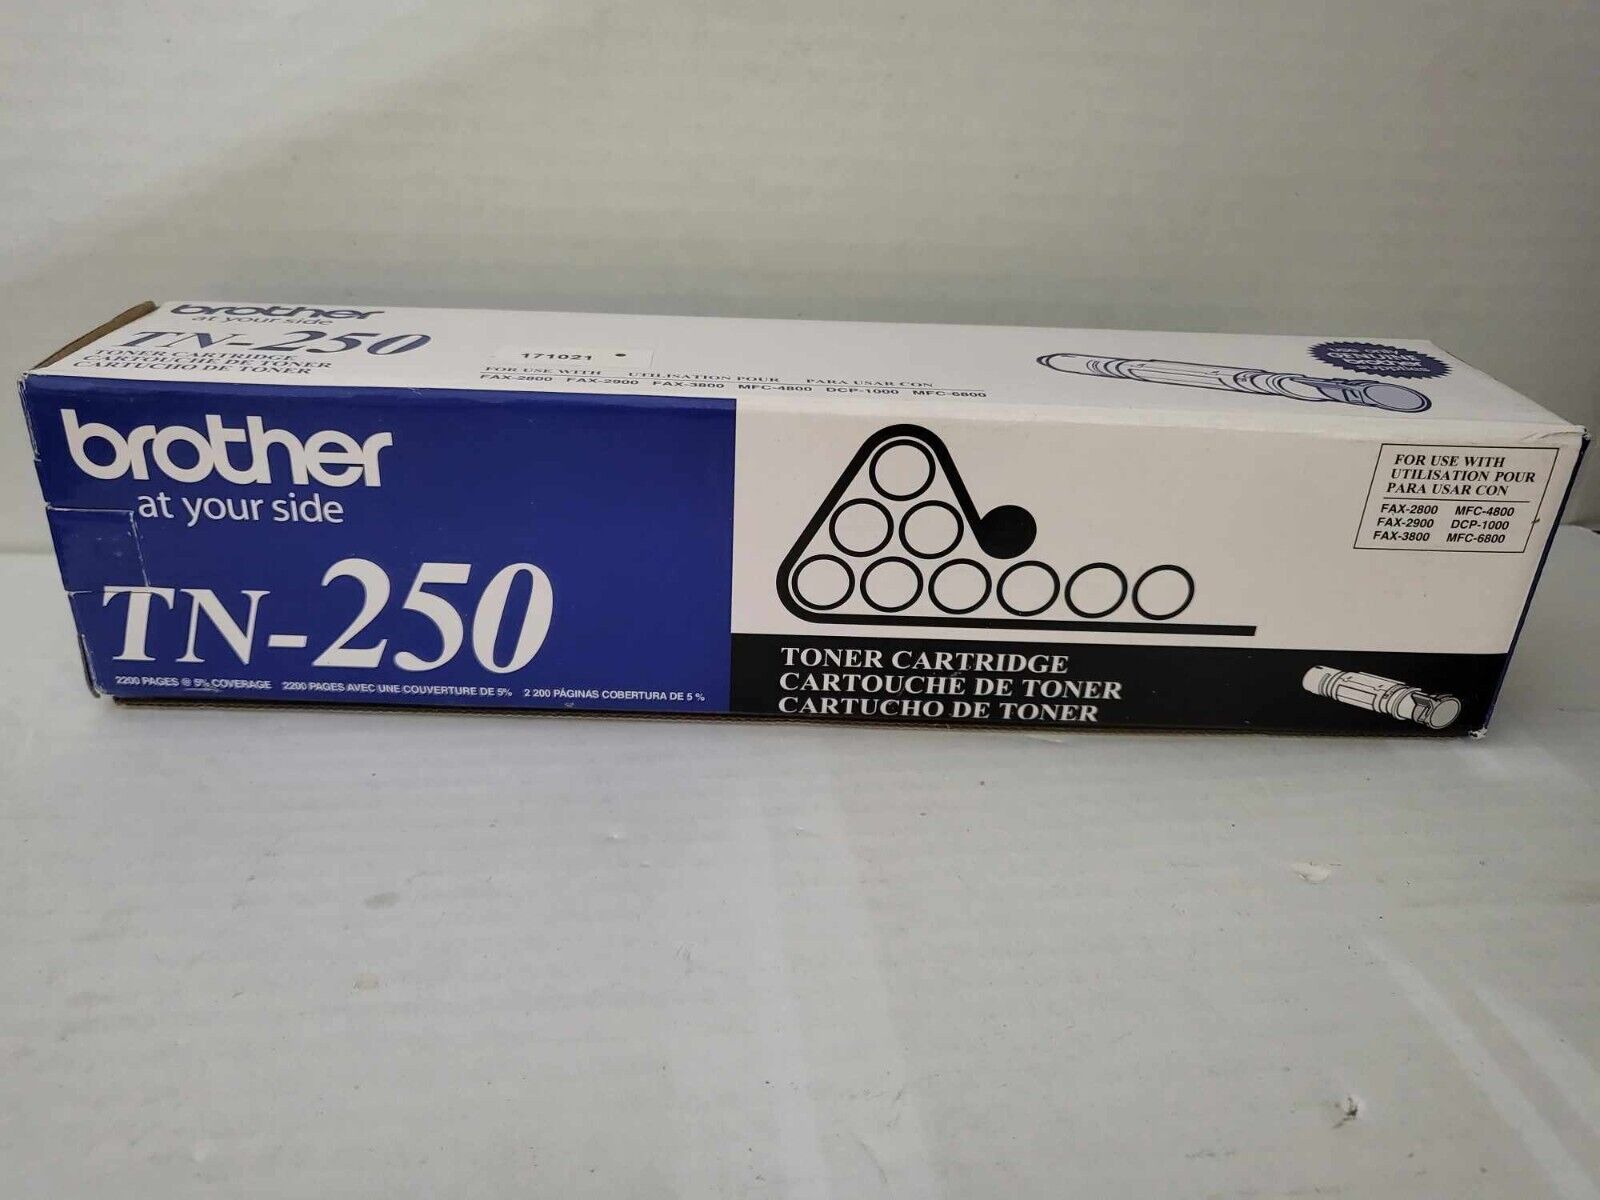 Brother Toner Cartridge FAX-2800 2900 3800 MFC-4800 6800 DCP-1000 TN-250